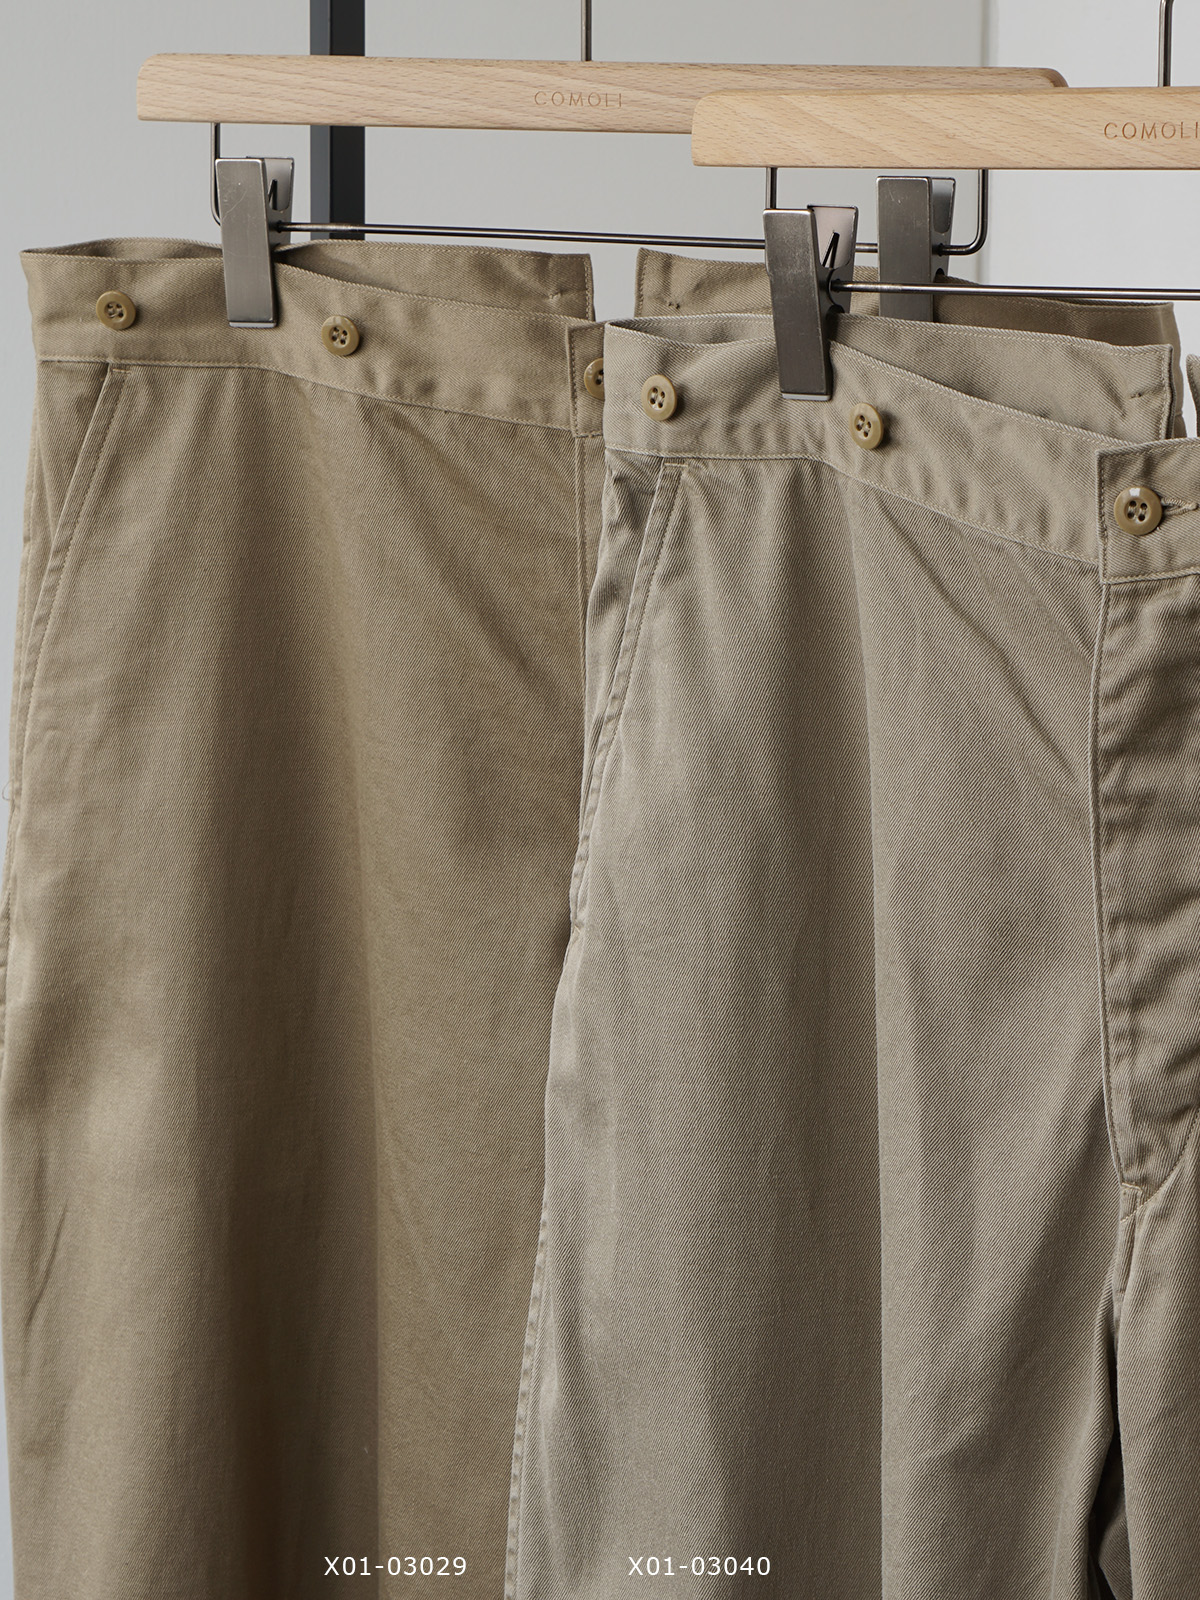 Washed Cotton Ripstop Coast Trousers - The Armoury